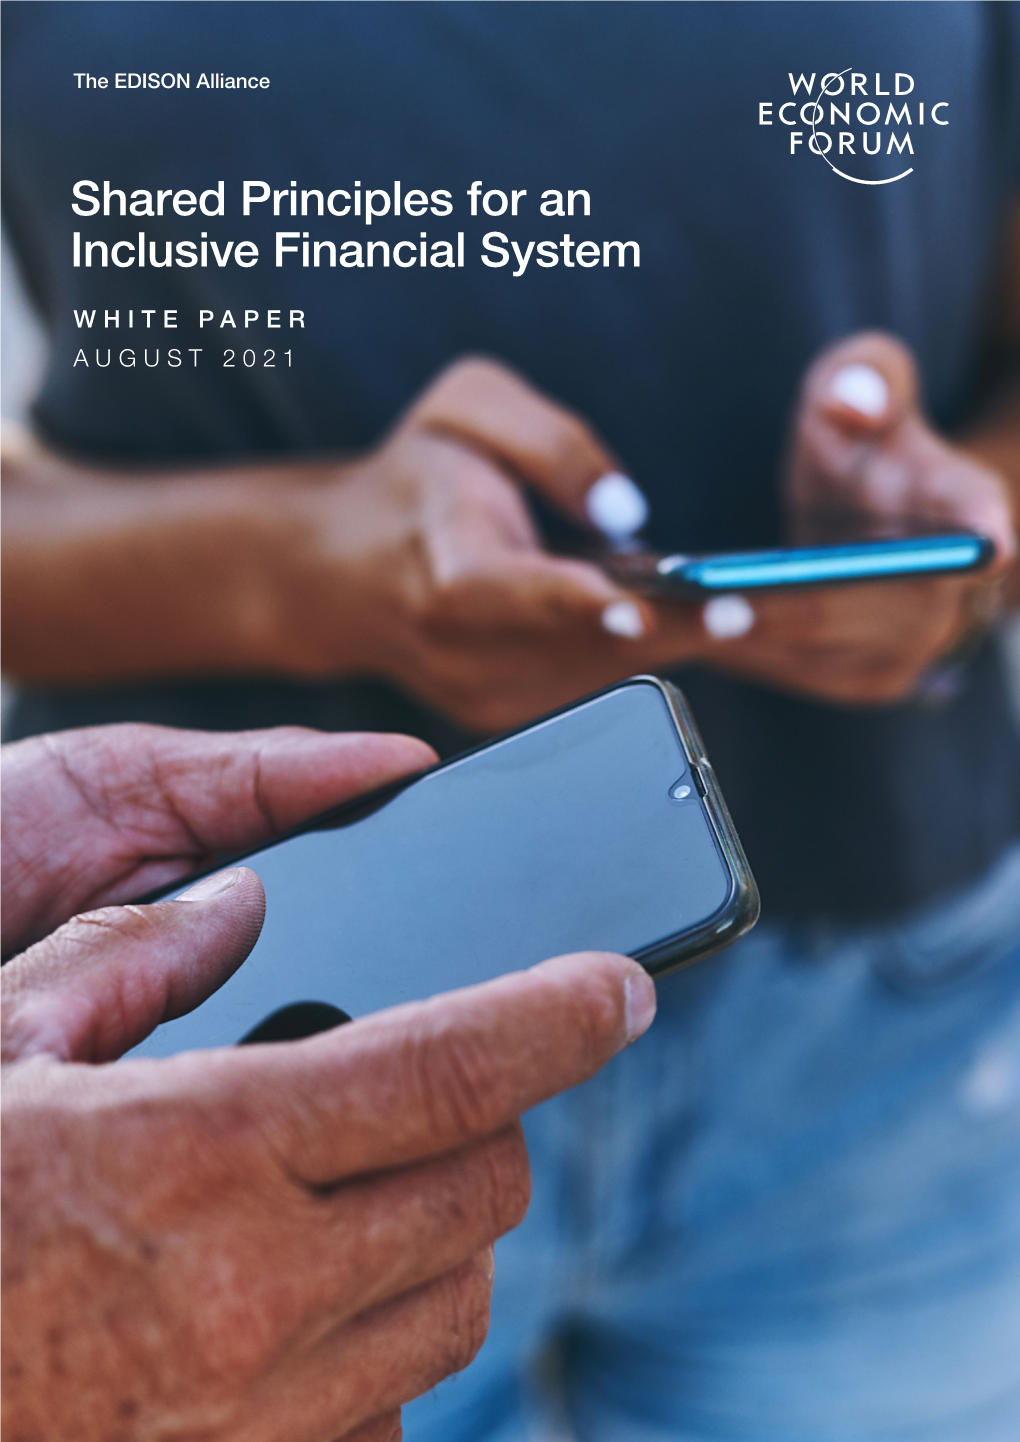 Shared Principles for an Inclusive Financial System